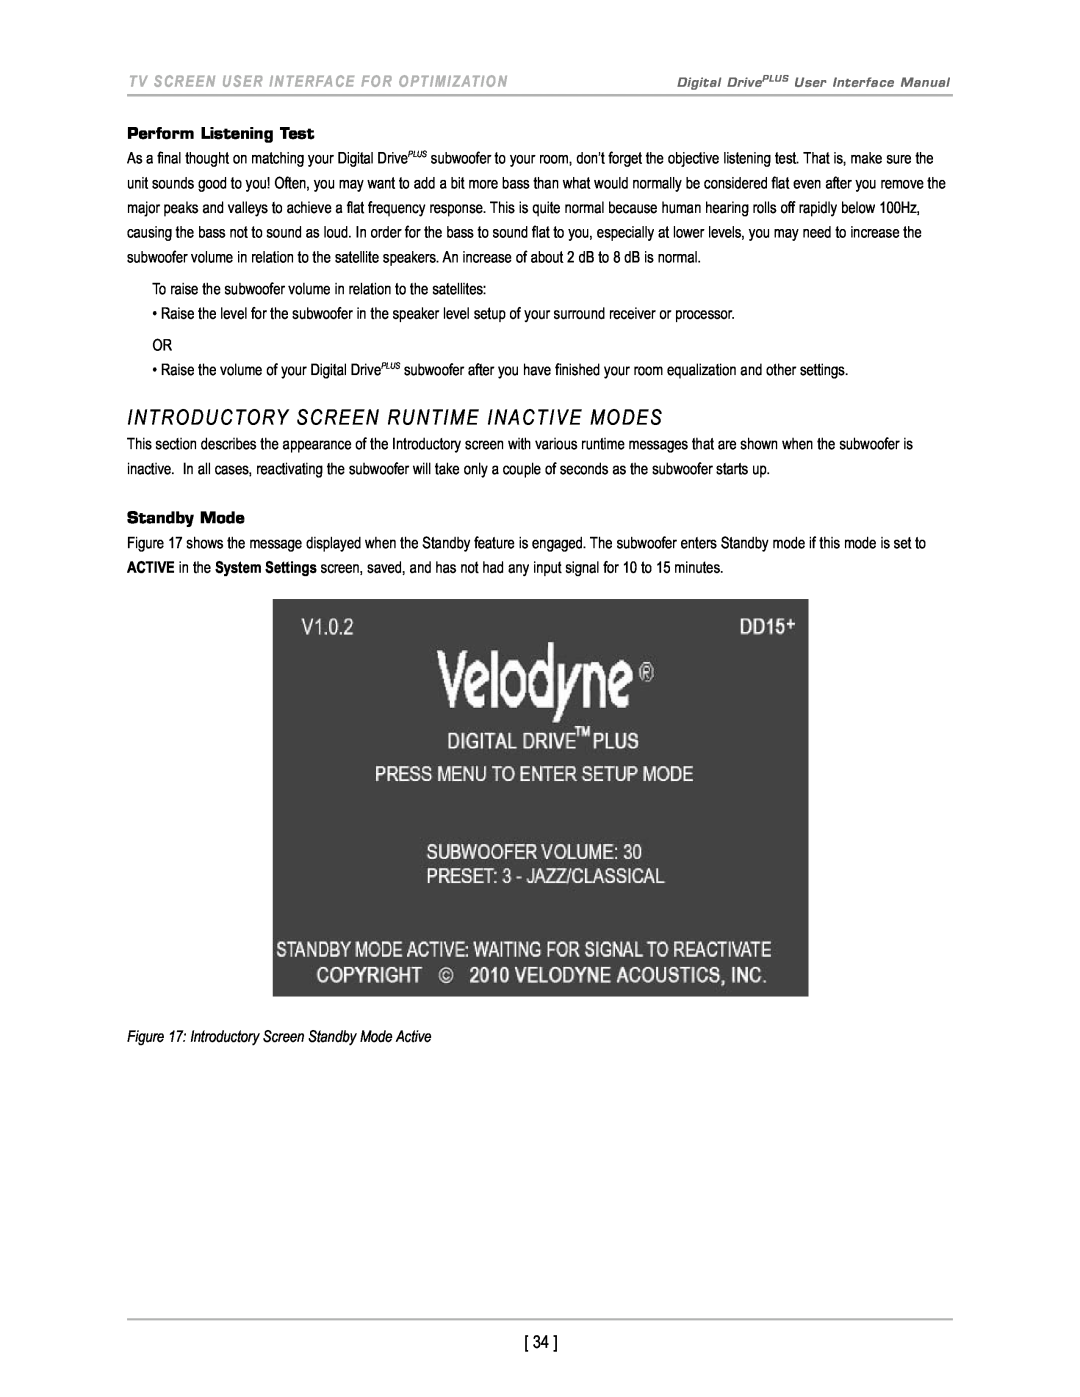 Velodyne Acoustics DD-18+, DD-15+ Introductory Screen Runtime Inactive Modes, Tv Screen User Interface For Optimization 